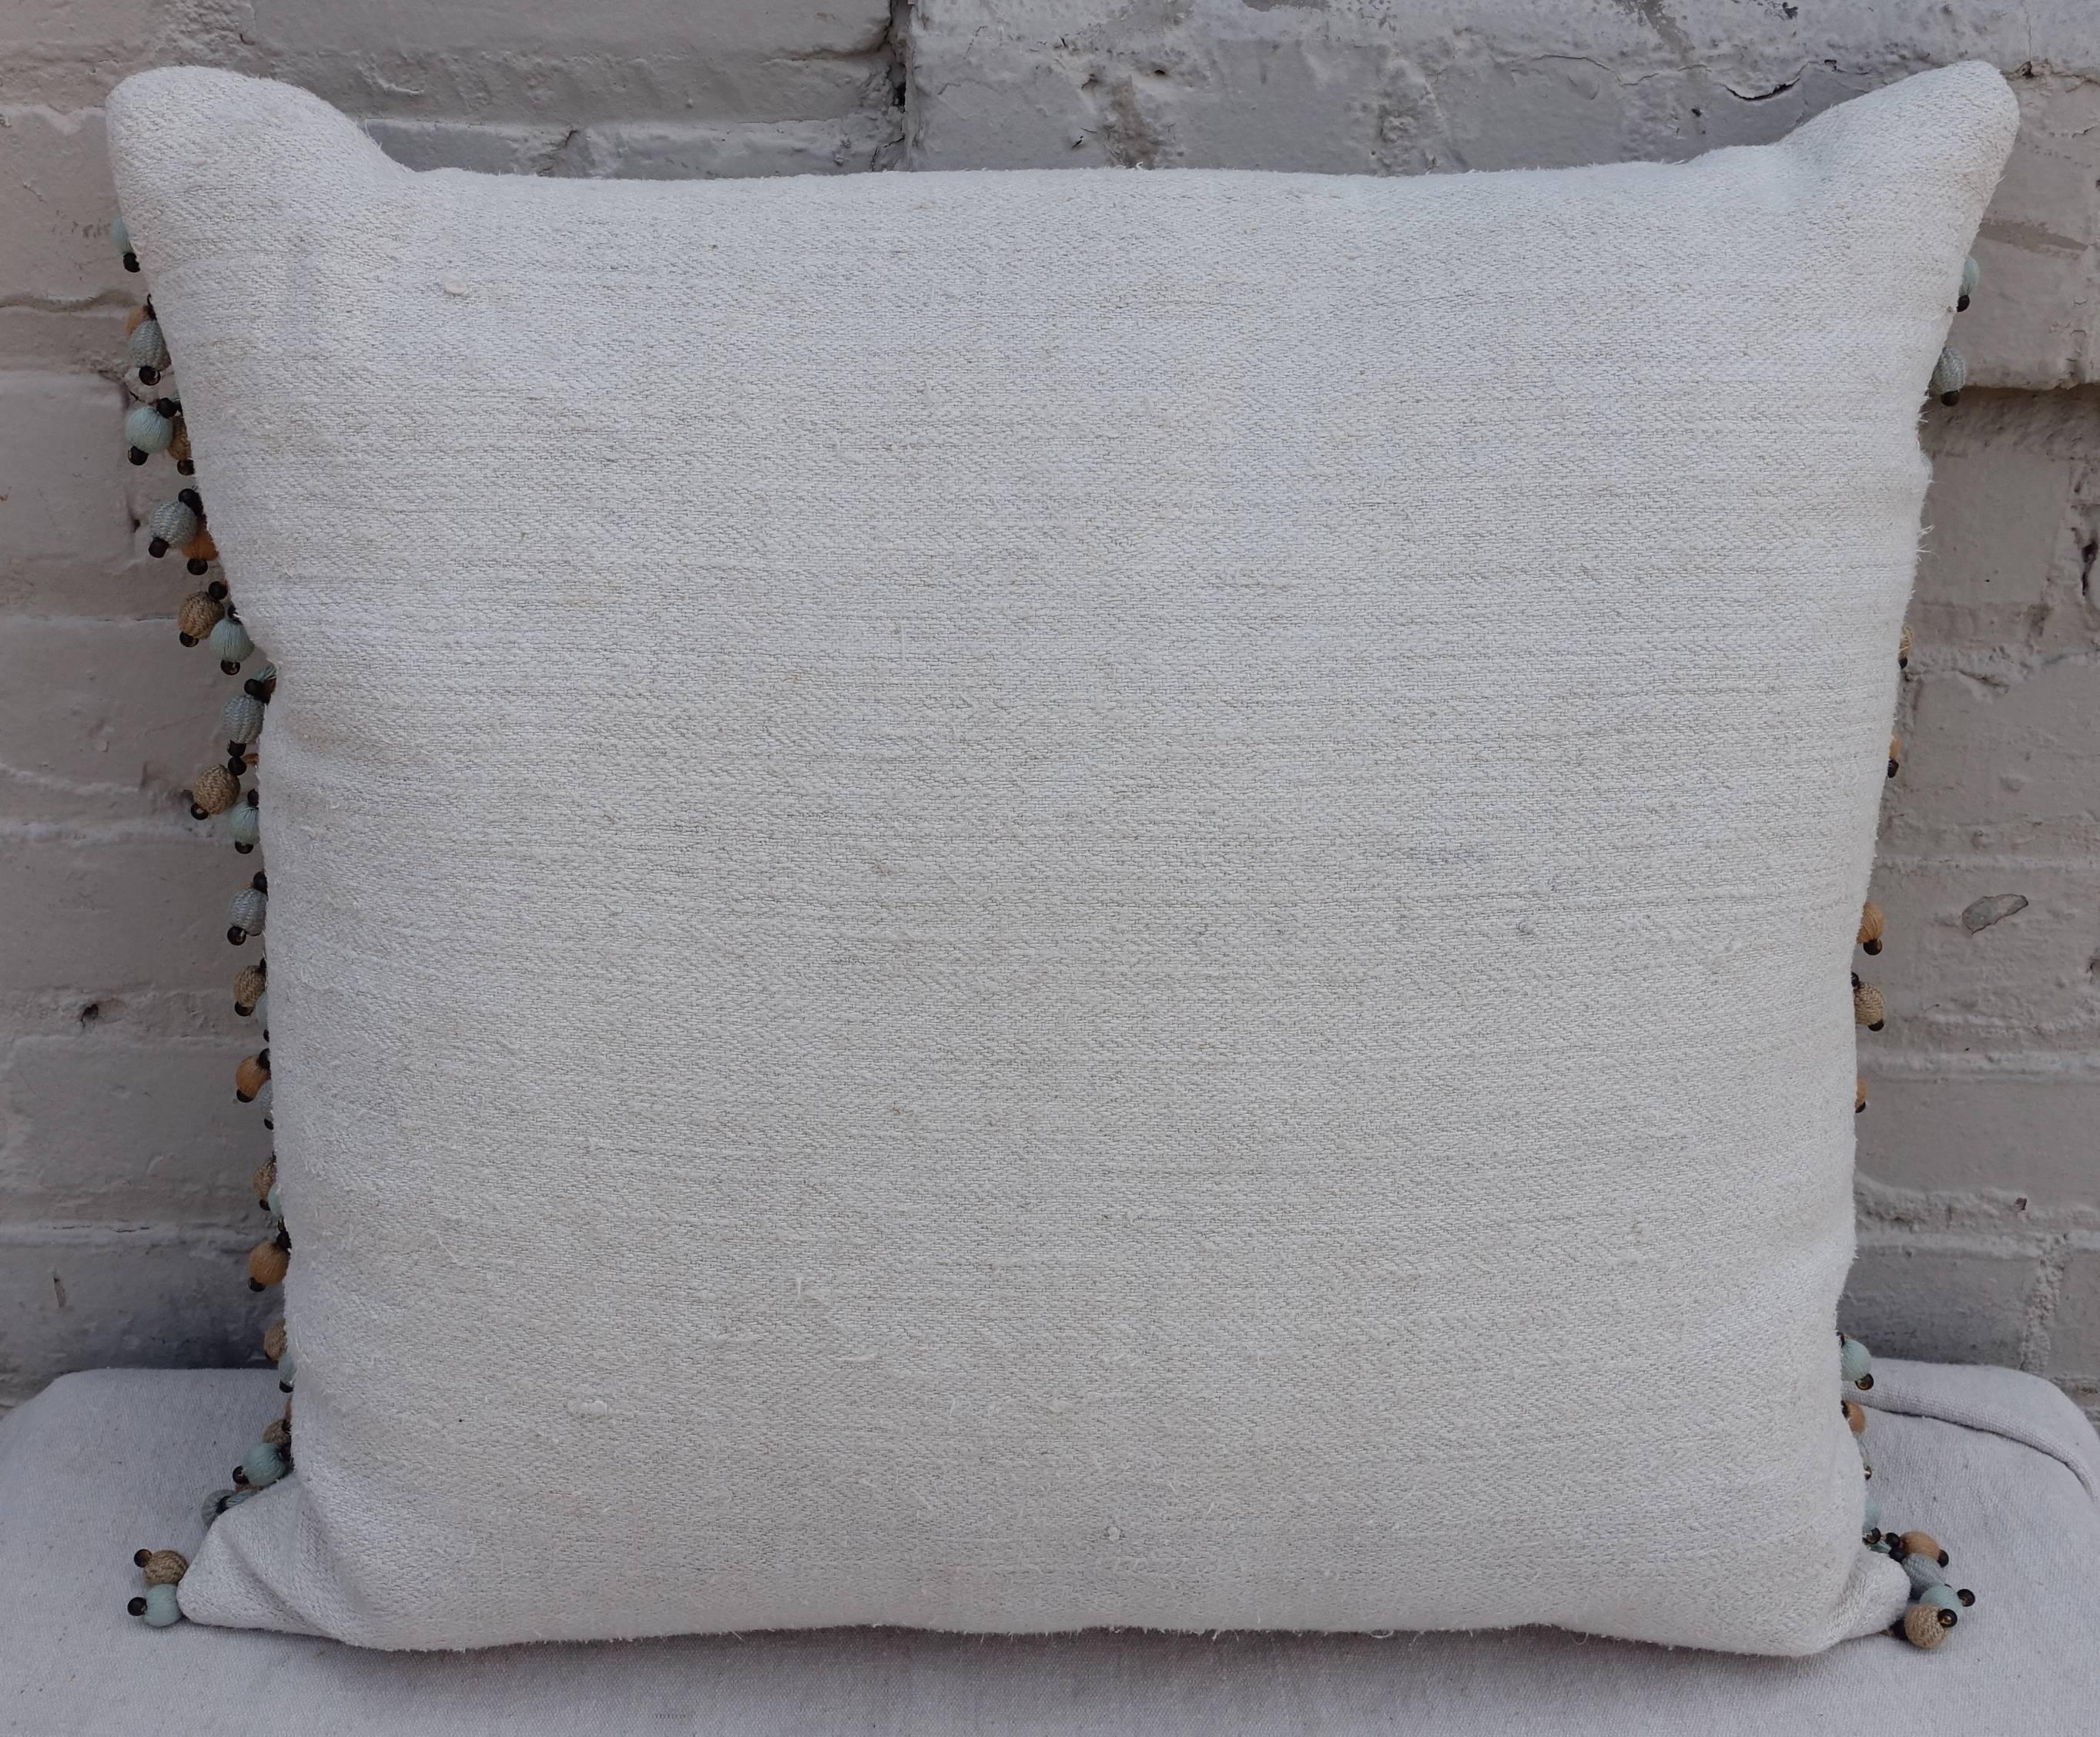 19th Century Italian Appliqued Linen Pillow with Fringe